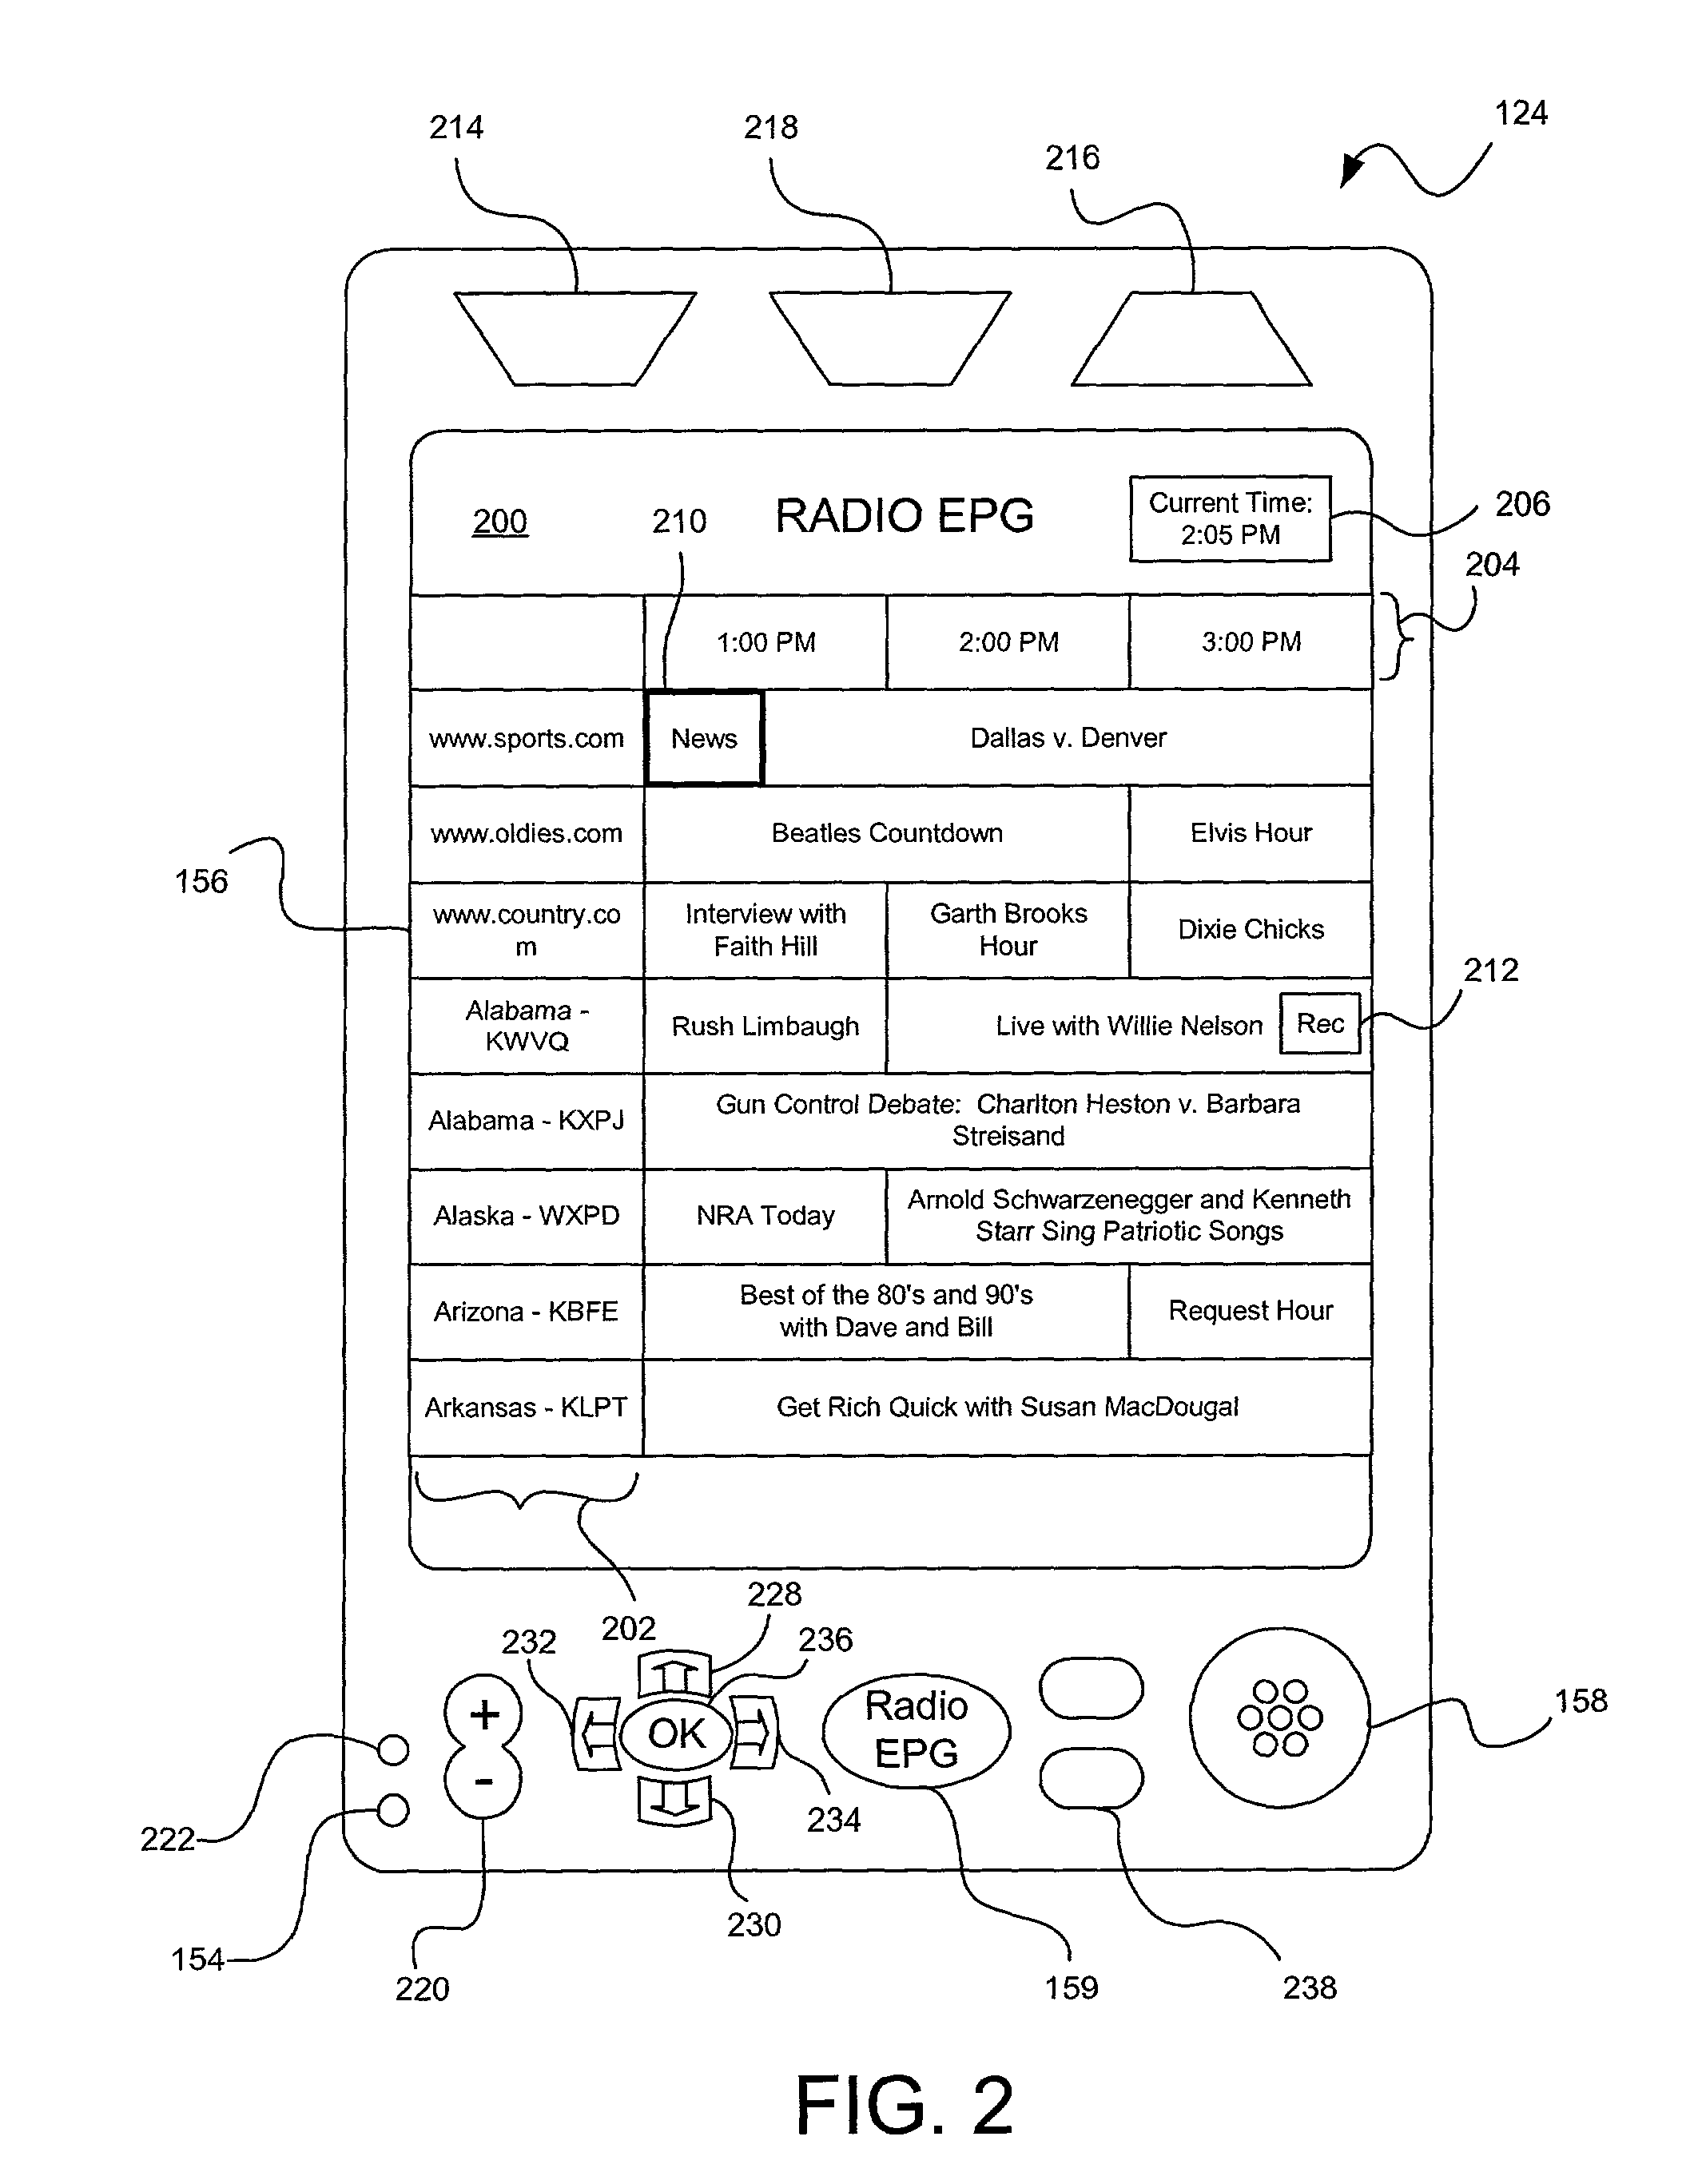 System and method for providing an electronic program guide of live and cached radio programs accessible to a mobile device